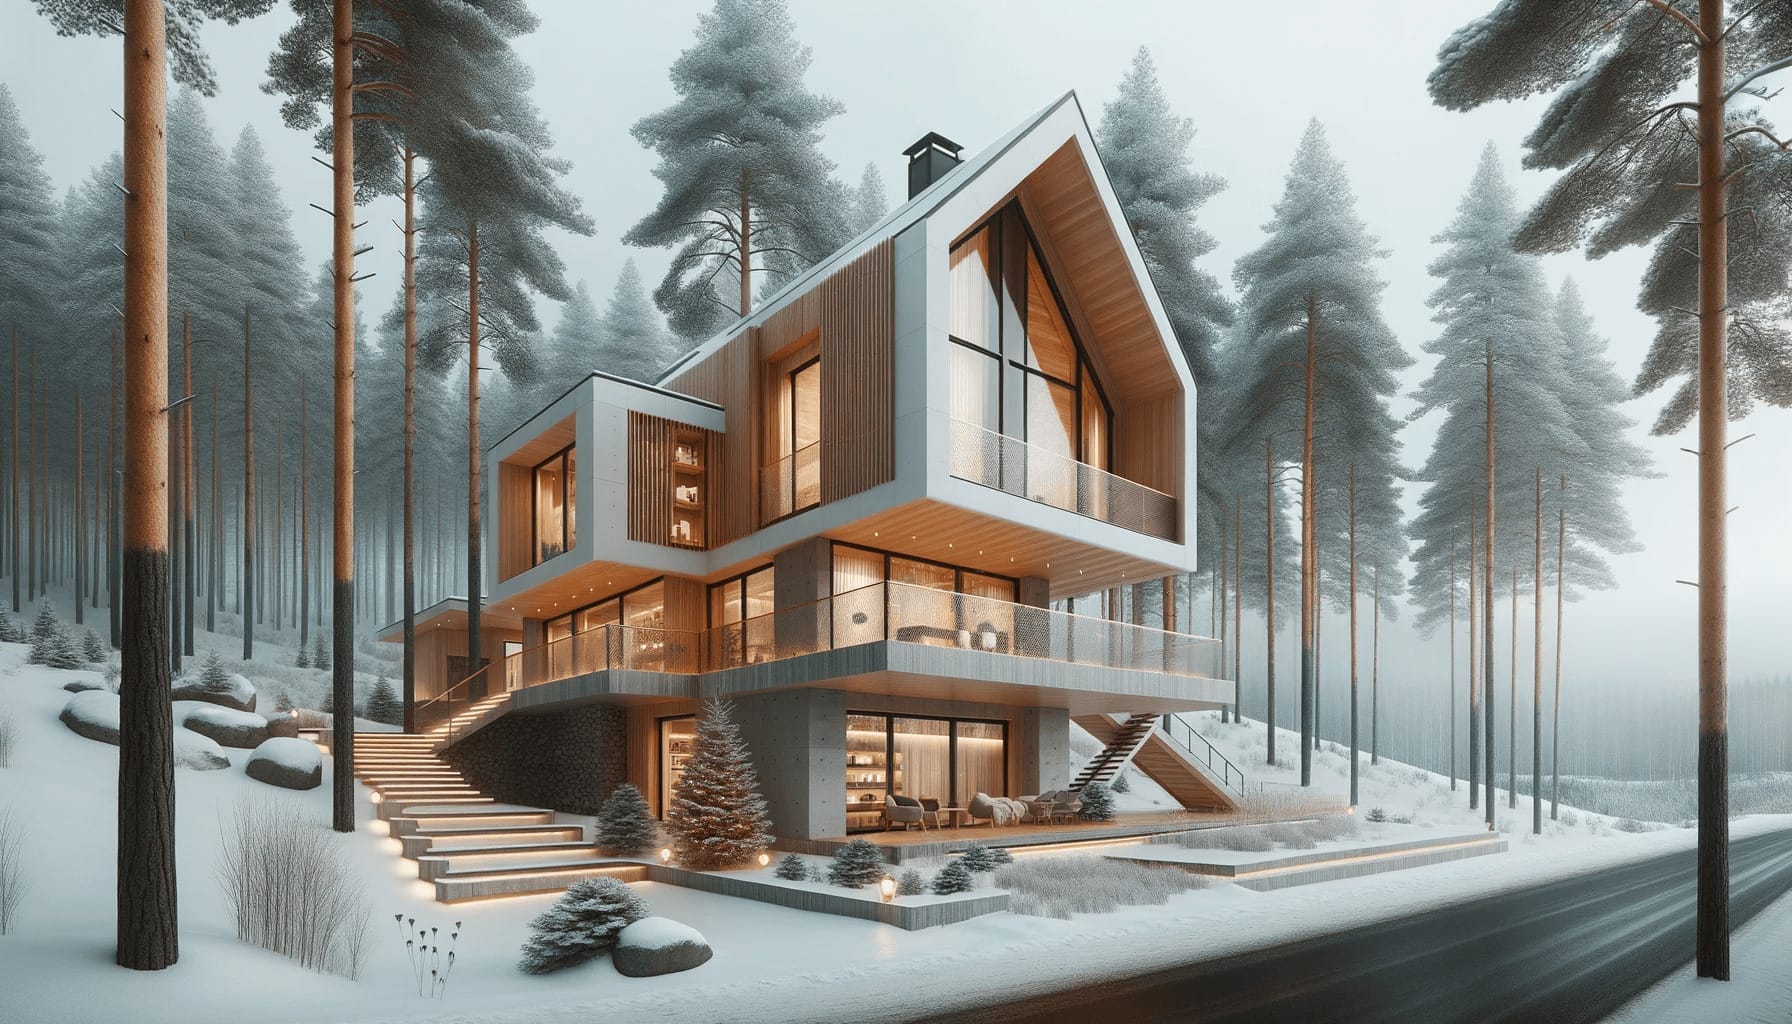 DALL·E 2023 10 19 09.12.13 Photo of a beautifully designed modern cabin house in a snowy landscape. The cabin has a unique geometric structure and is surrounded by pine trees